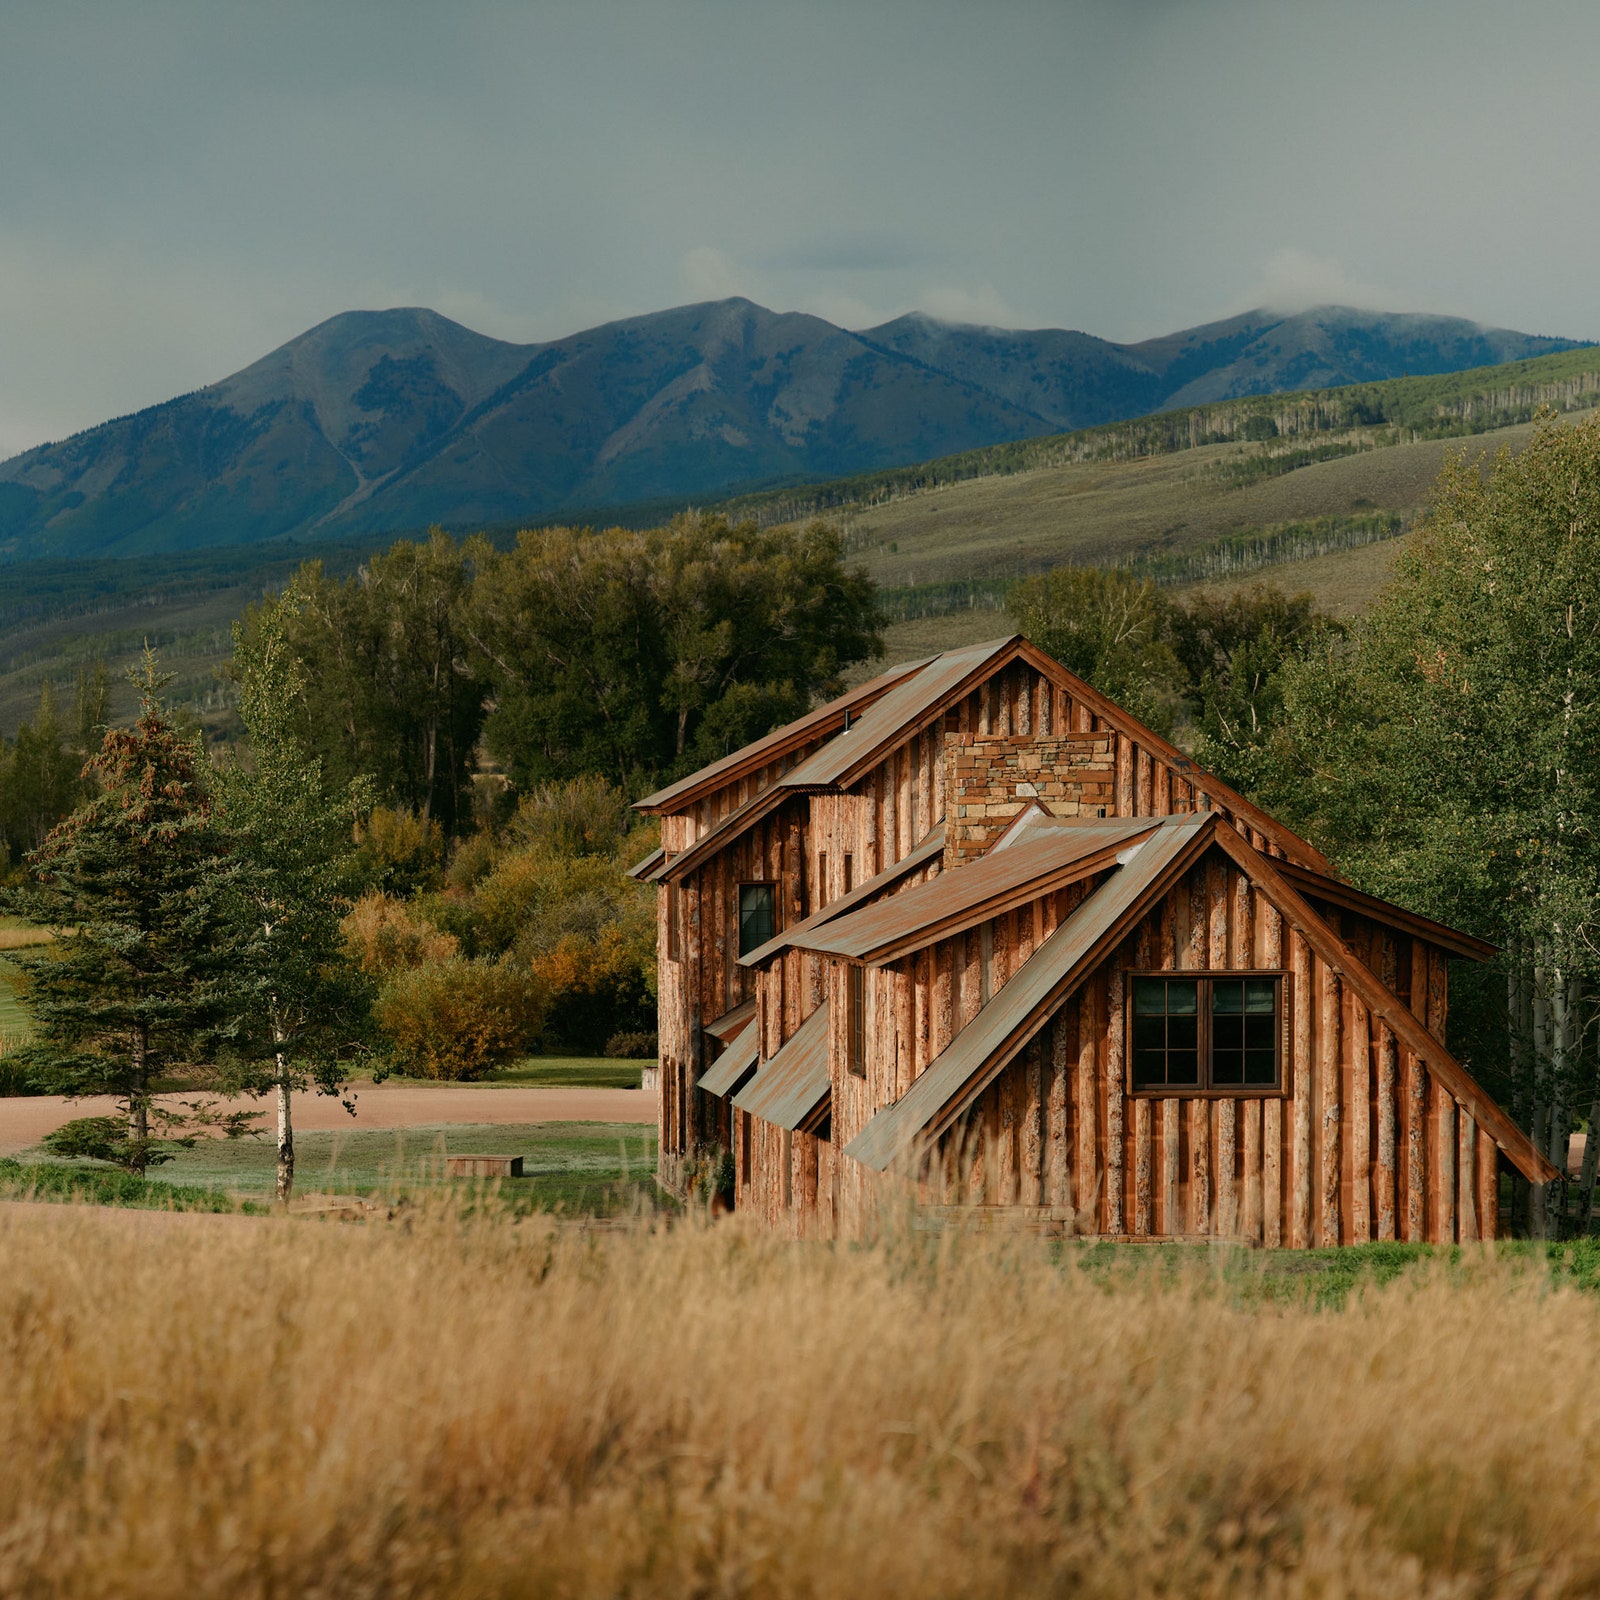 Clive Lonstein conjures traditional rustic interiors for a Colorado log cabin